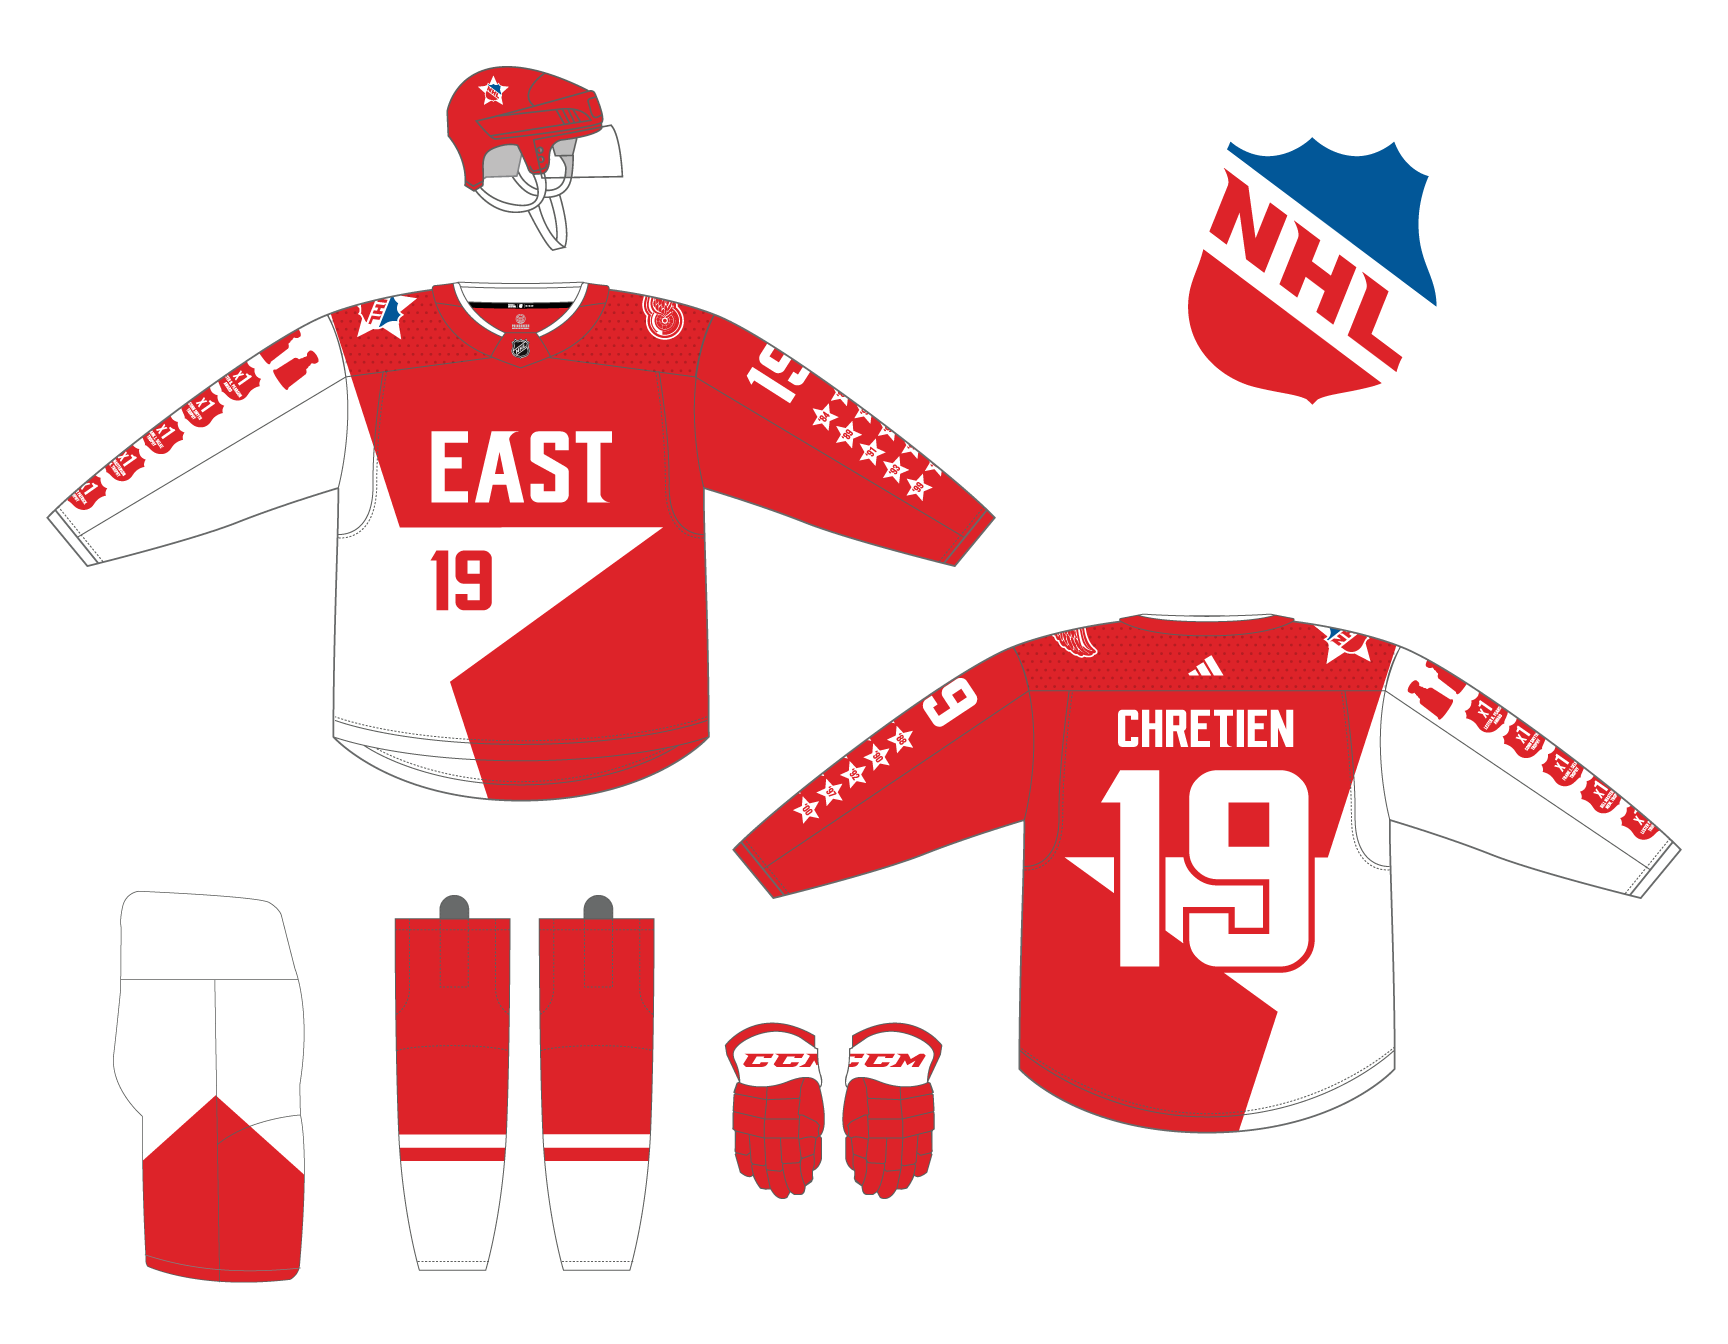 Cd24_Design] NHL alternate jersey concepts for the Atlantic